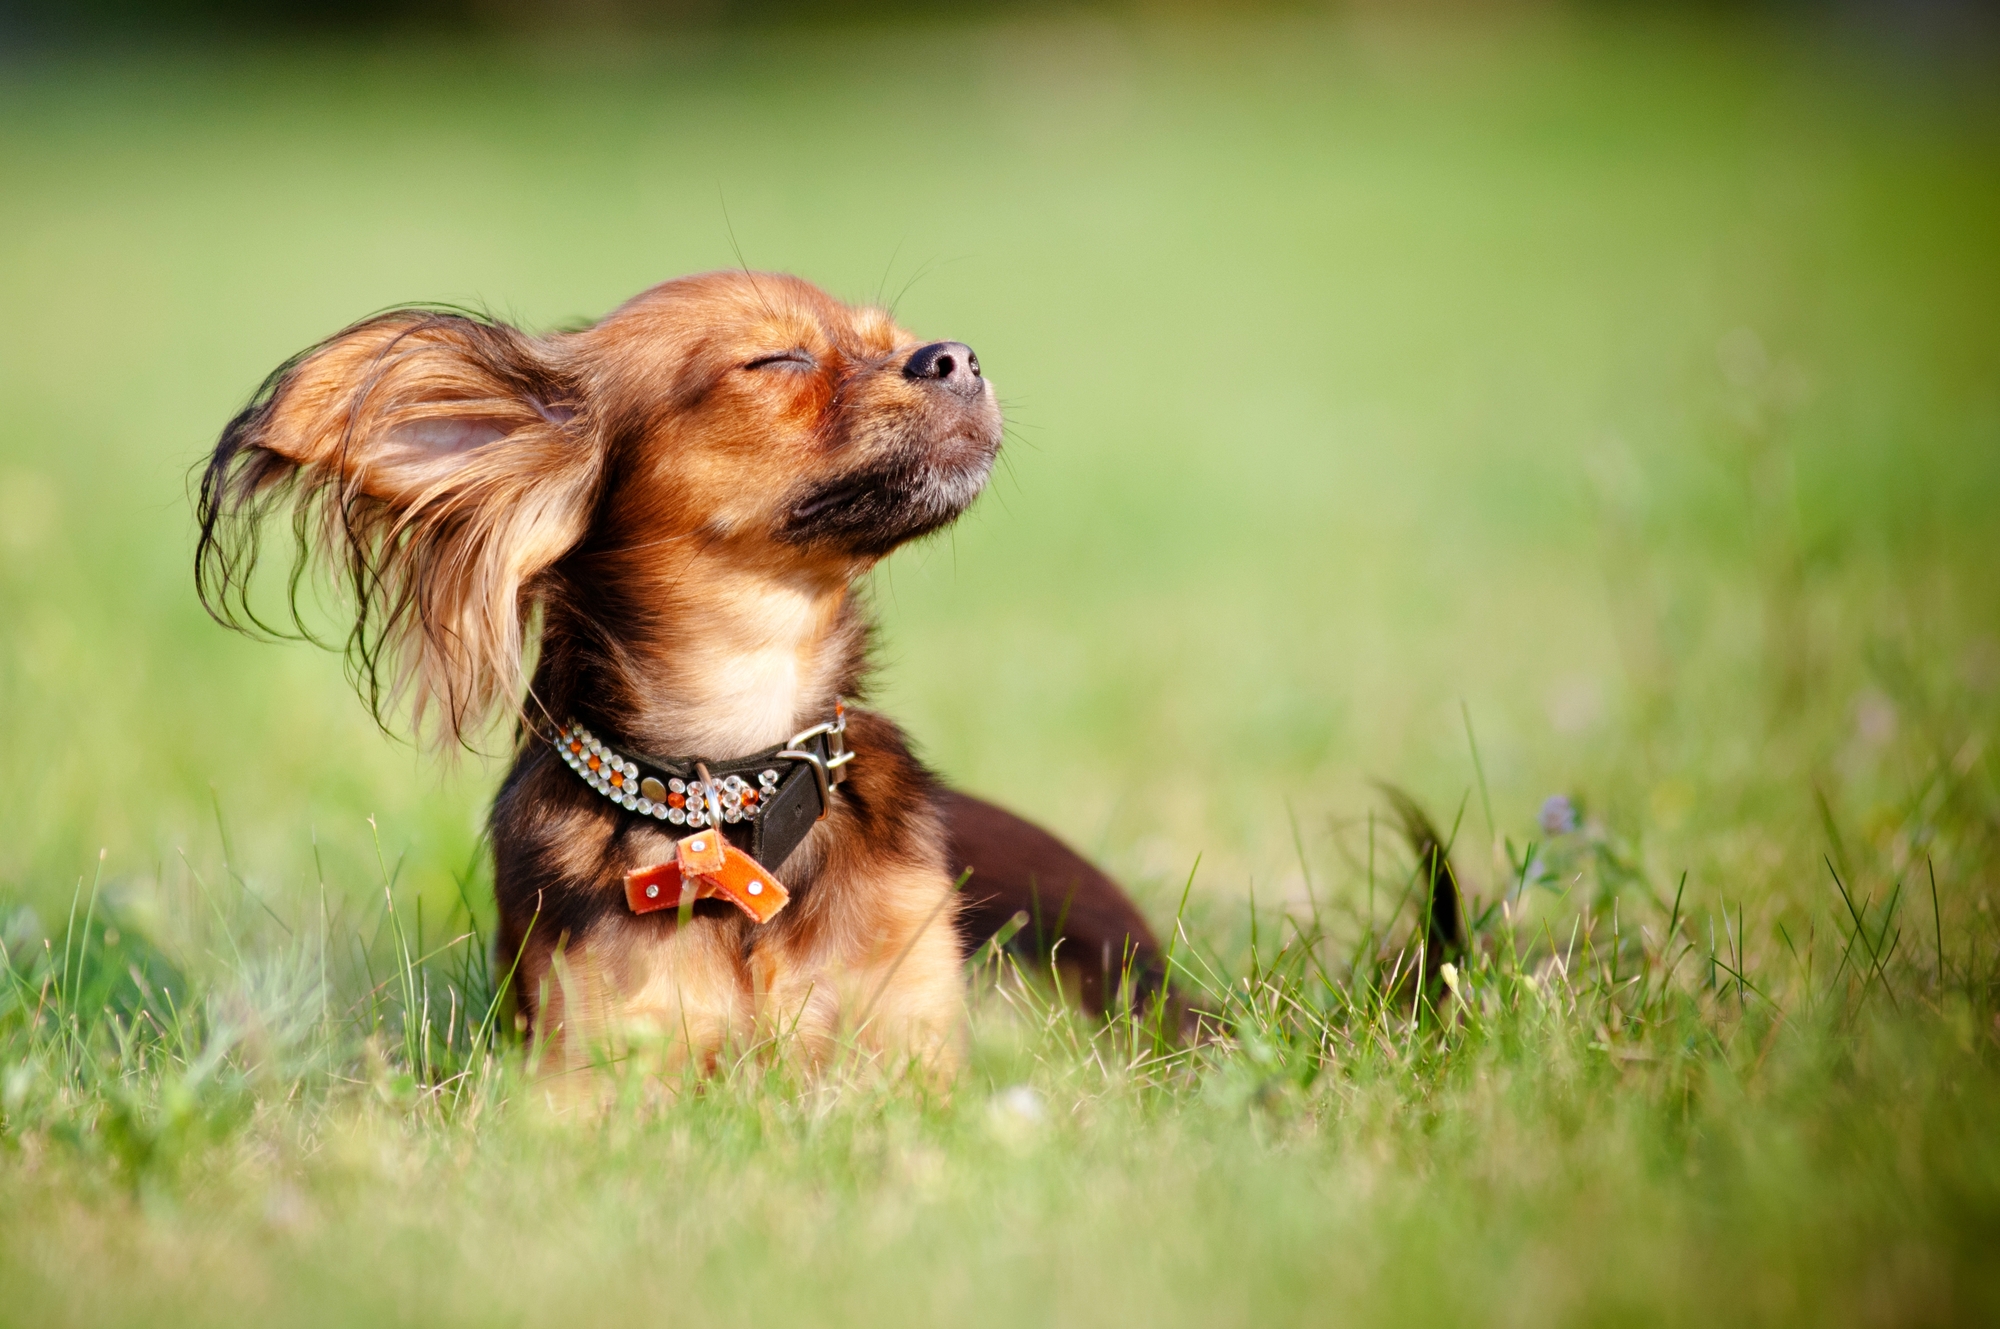 Cute dog squinting with the wind blowing in his face